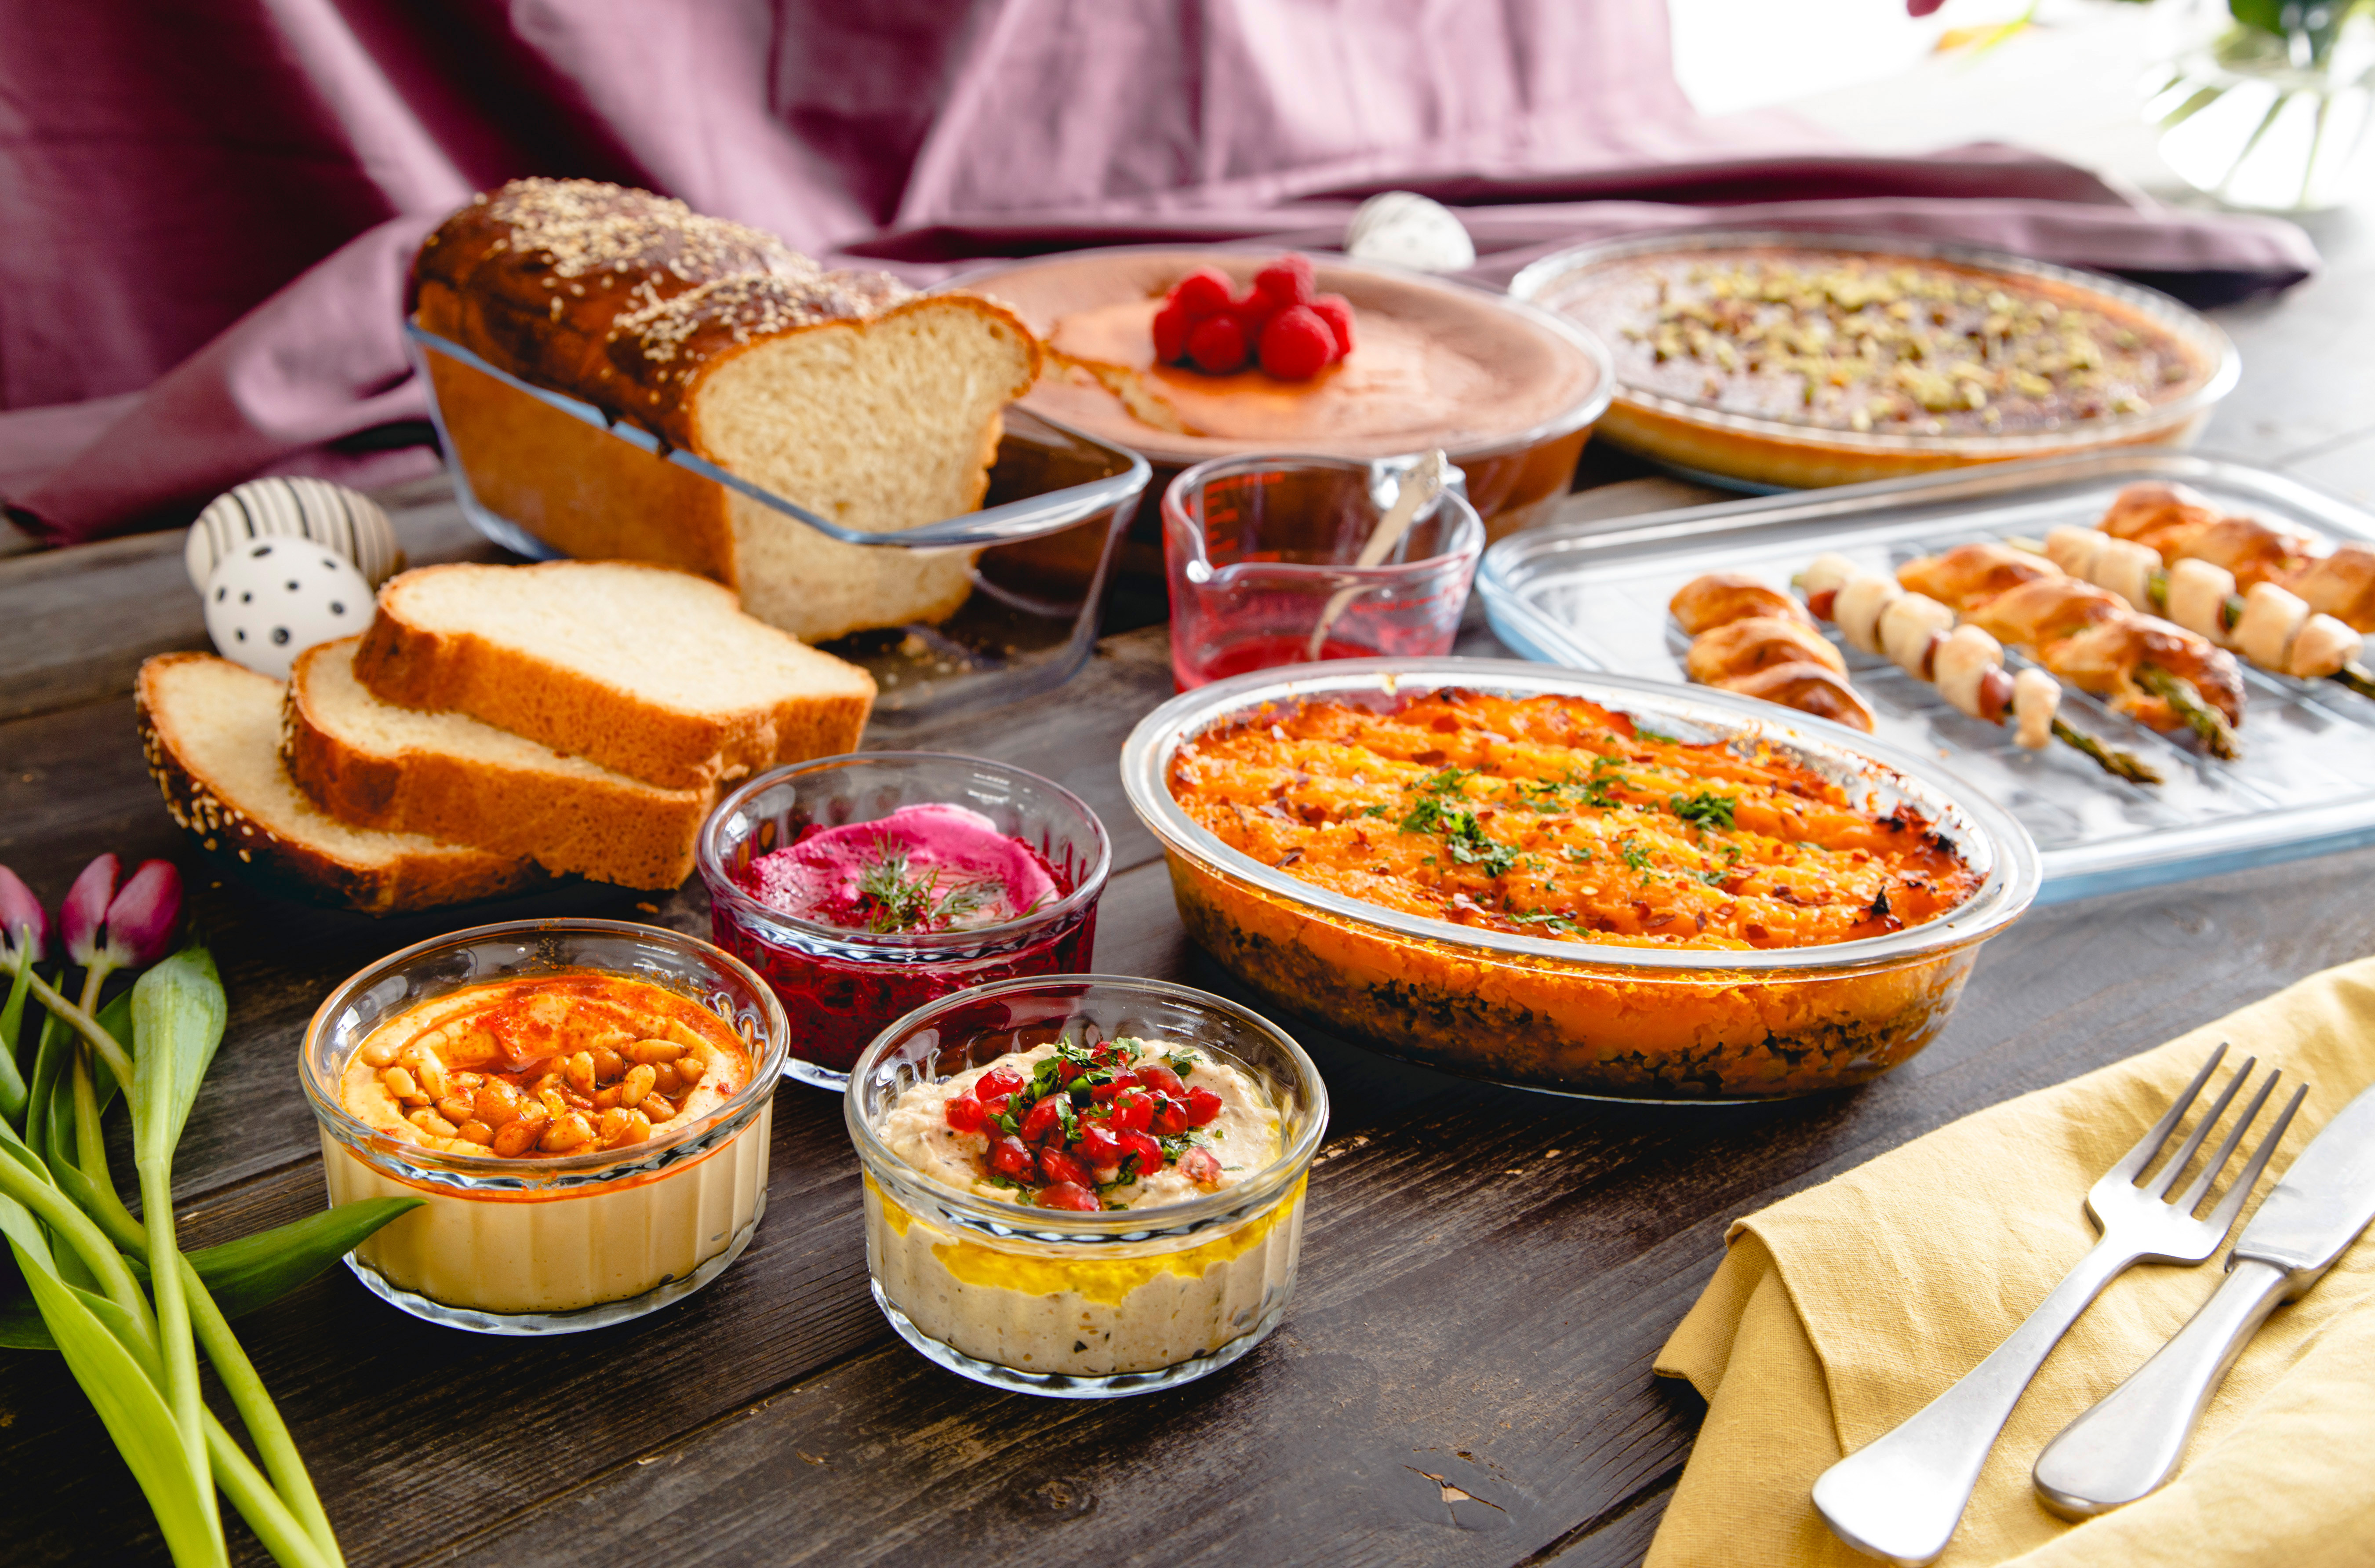 Easter Dinner Menu For A Crowd
 CREATE AN INSTAGRAM WORTHY EASTER FEAST WITH PYREX’S TOP